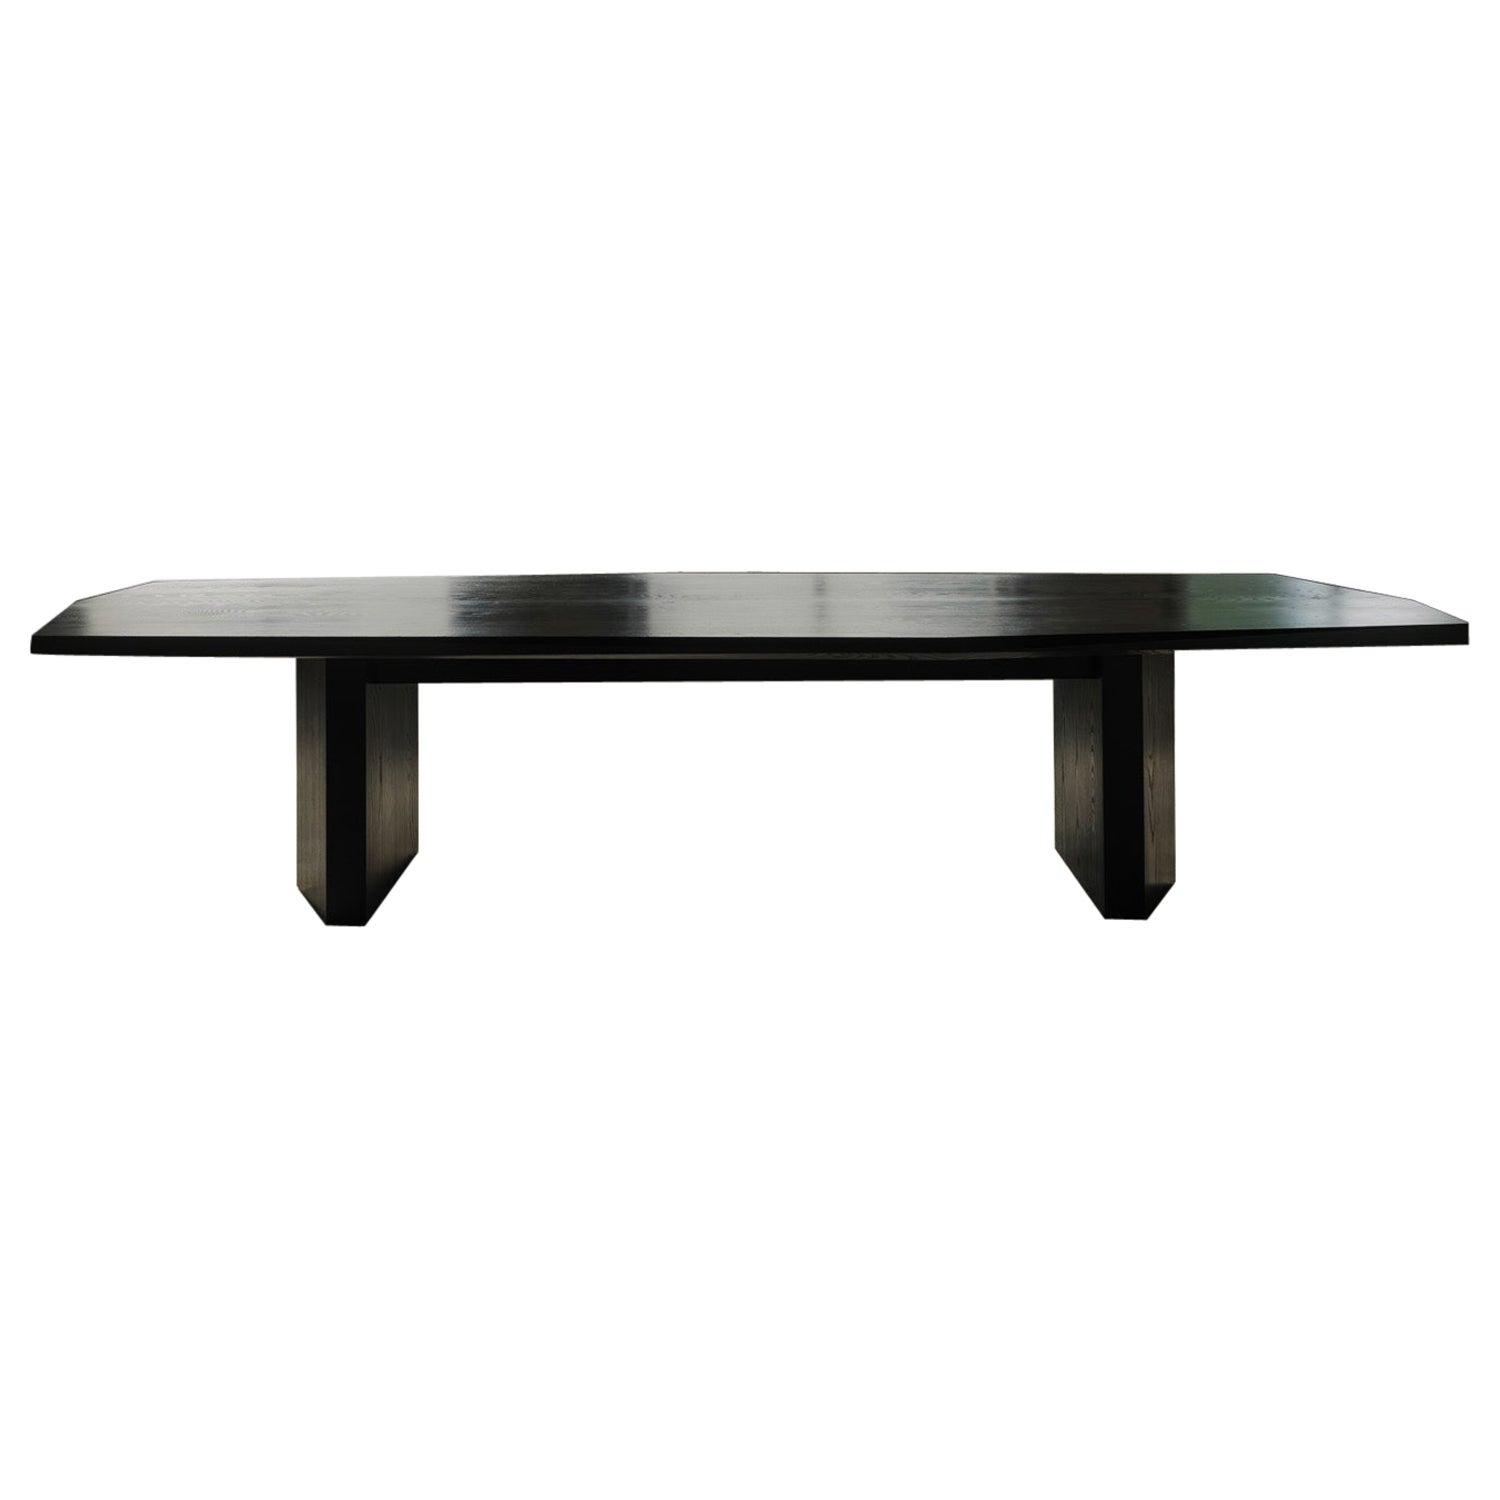 Contemporary Solid Ash Black Hera Dining Table Big by Tim Vranken For Sale